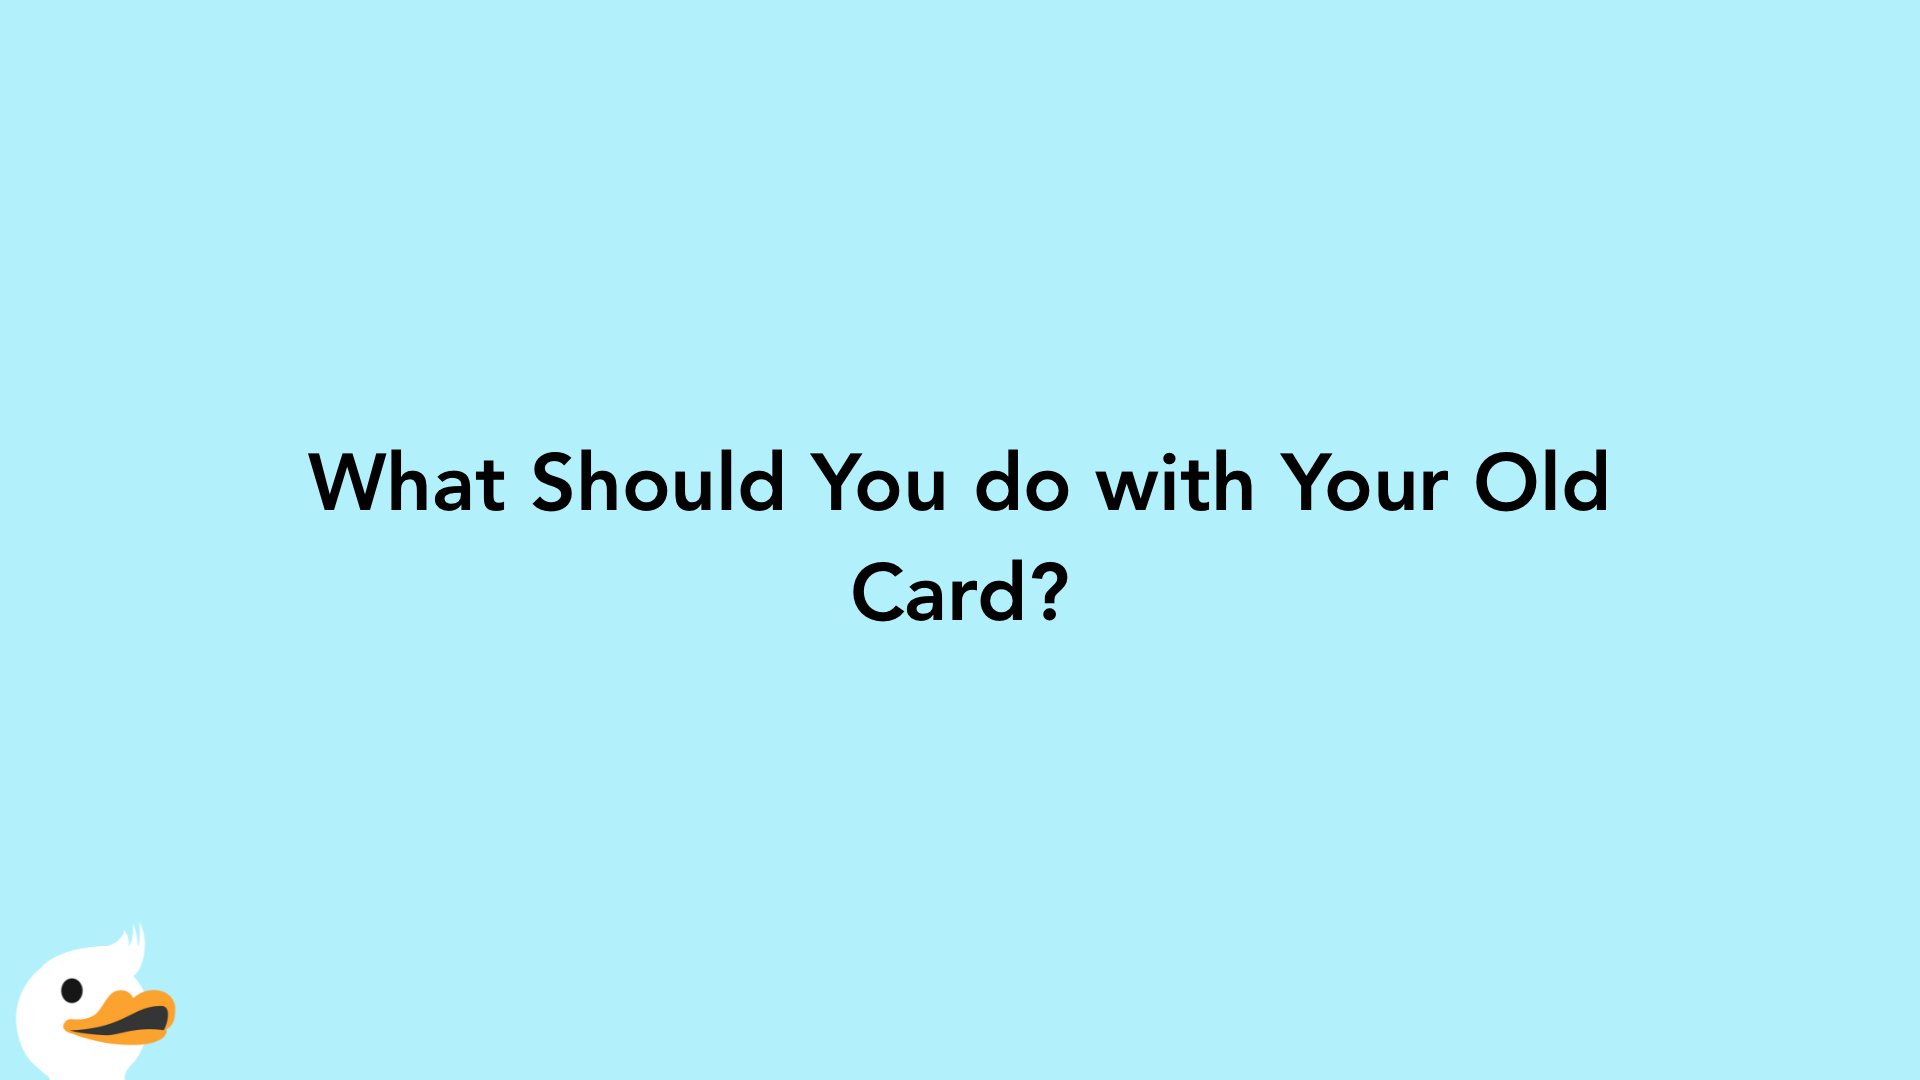 What Should You do with Your Old Card?